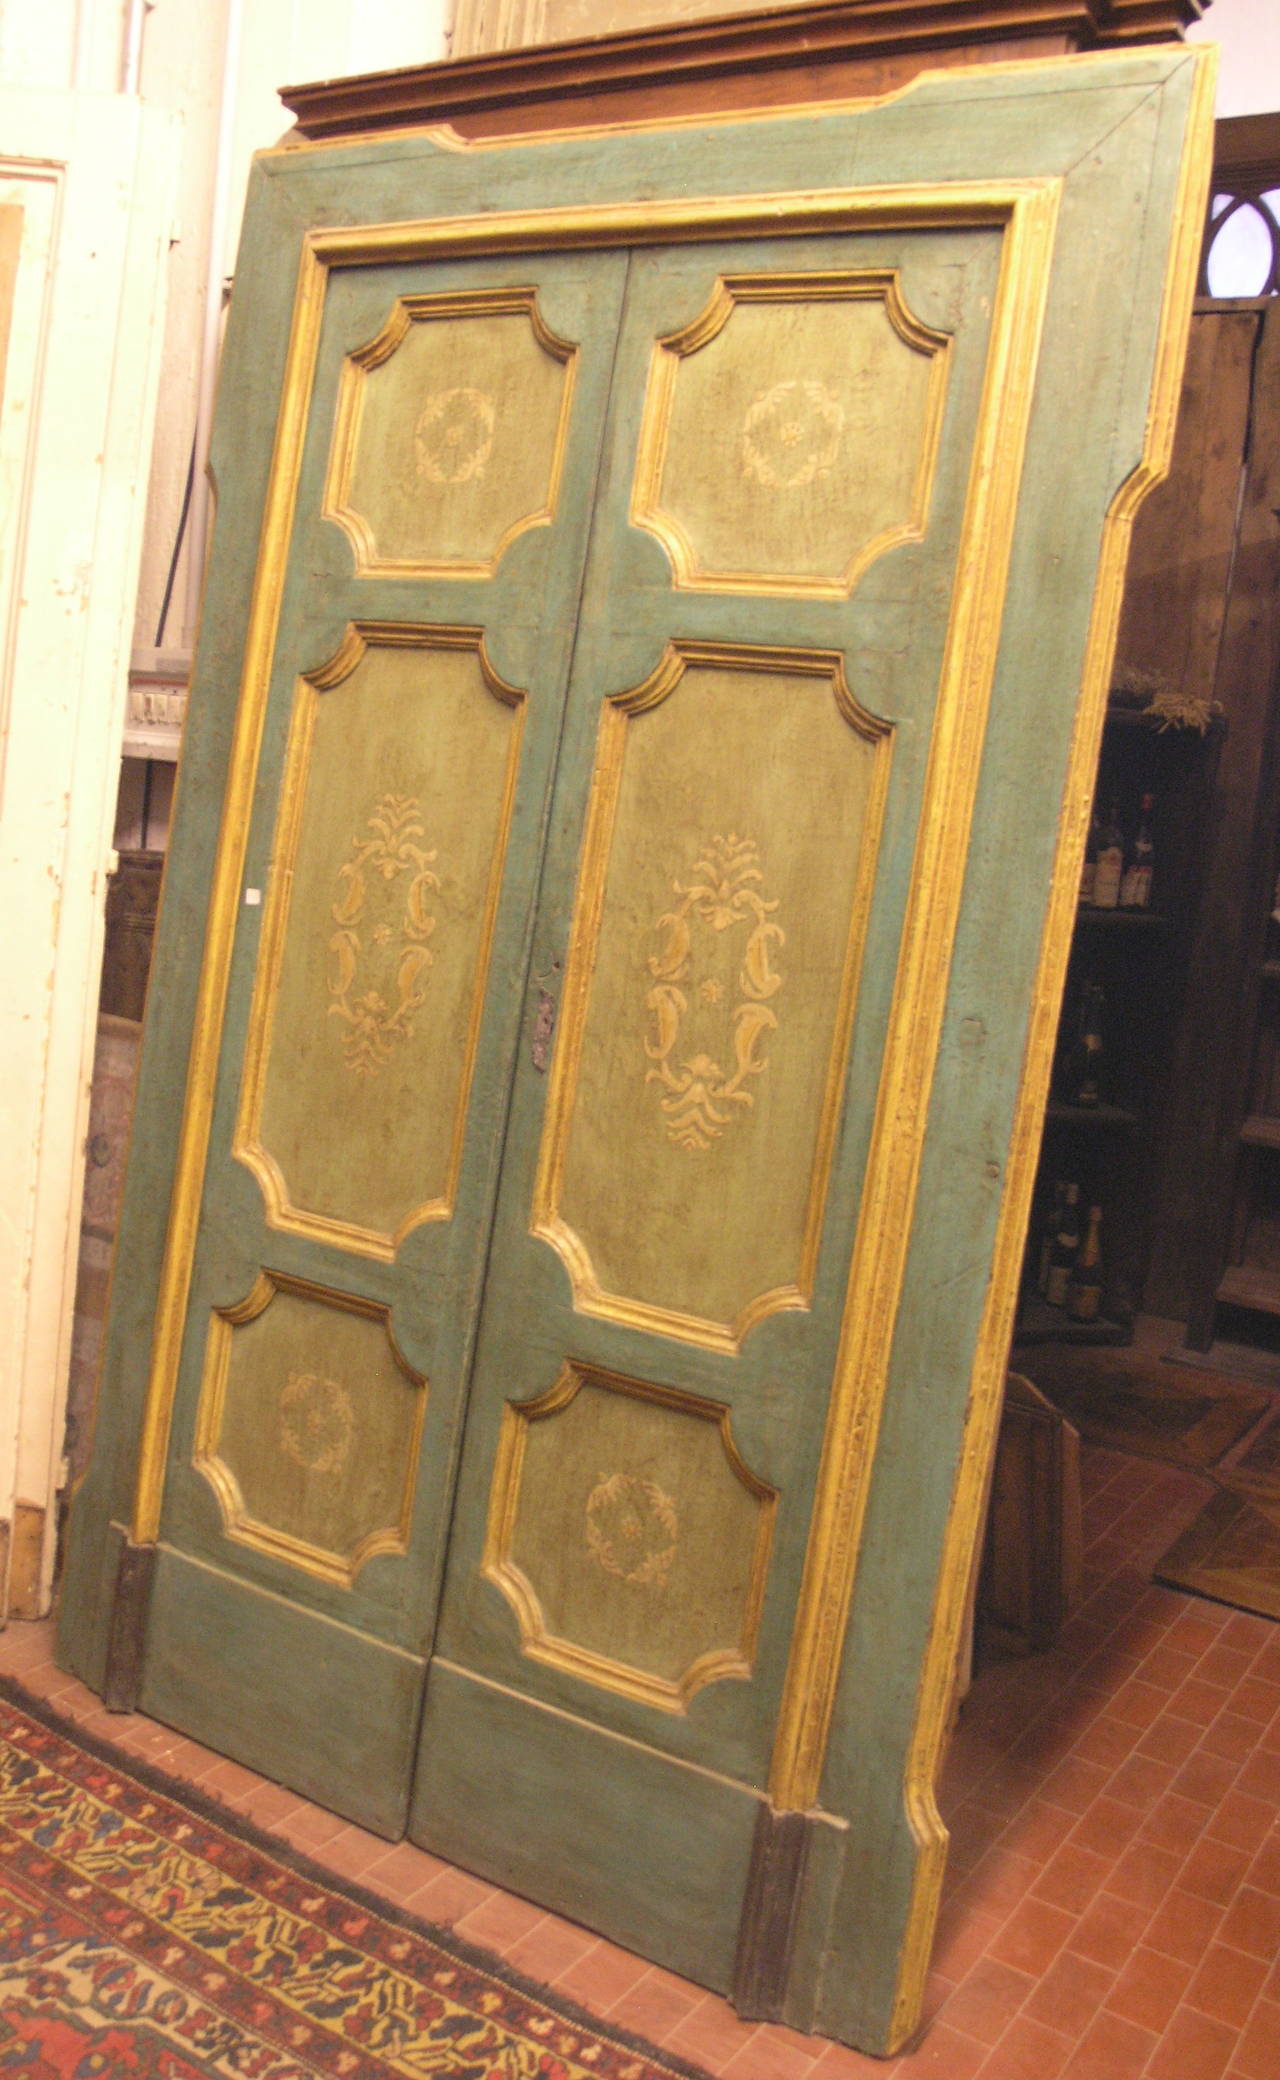 Antique lacquered double door.
Original frame.
Comes from Naples, Italy.